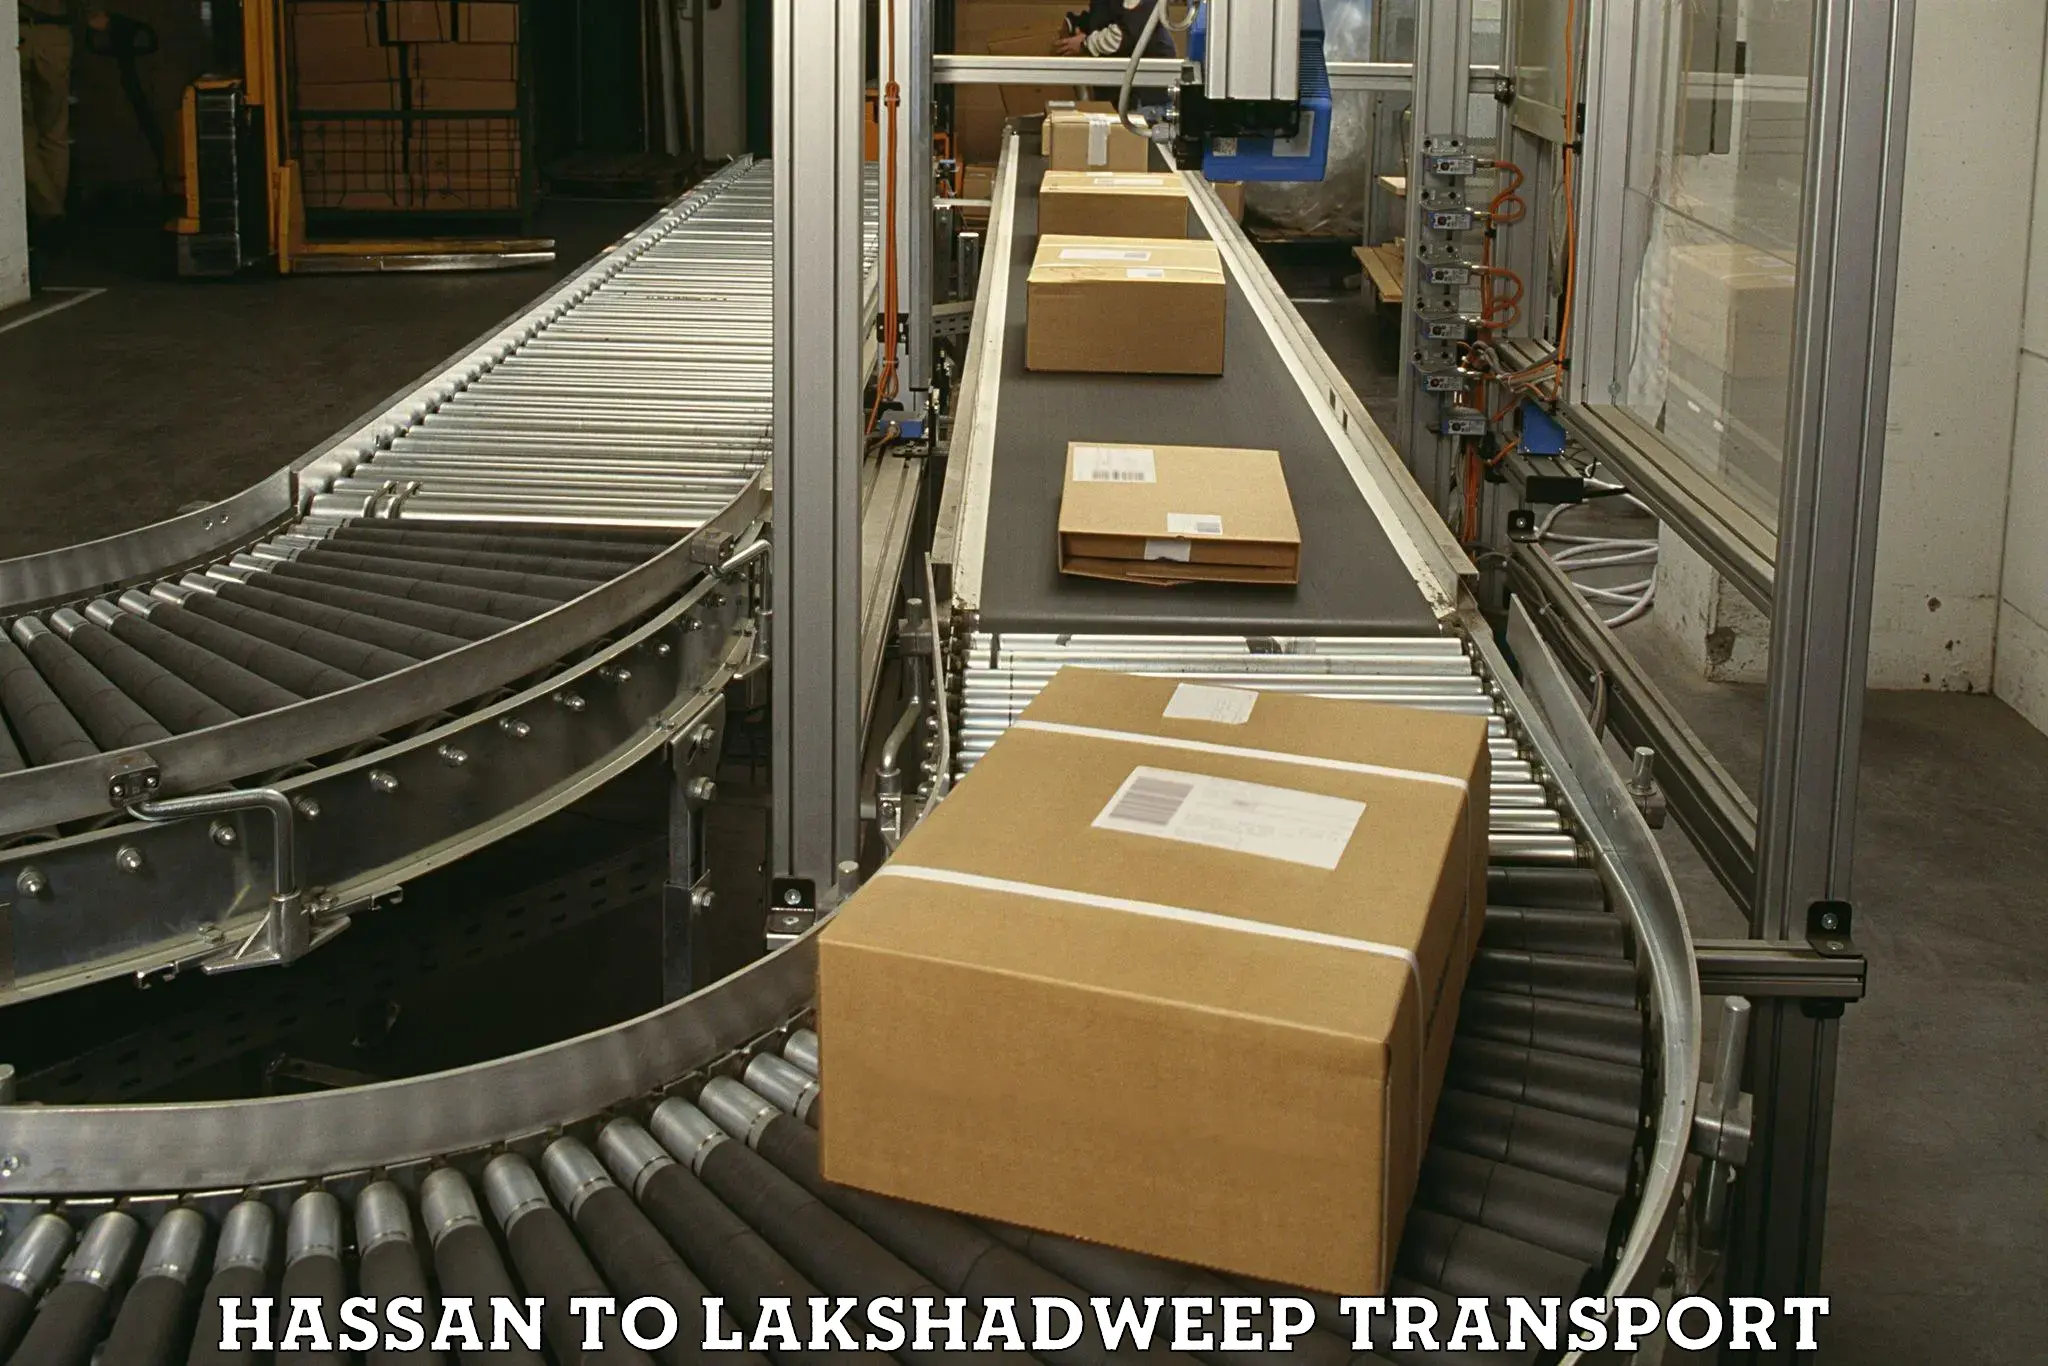 Vehicle transport services Hassan to Lakshadweep